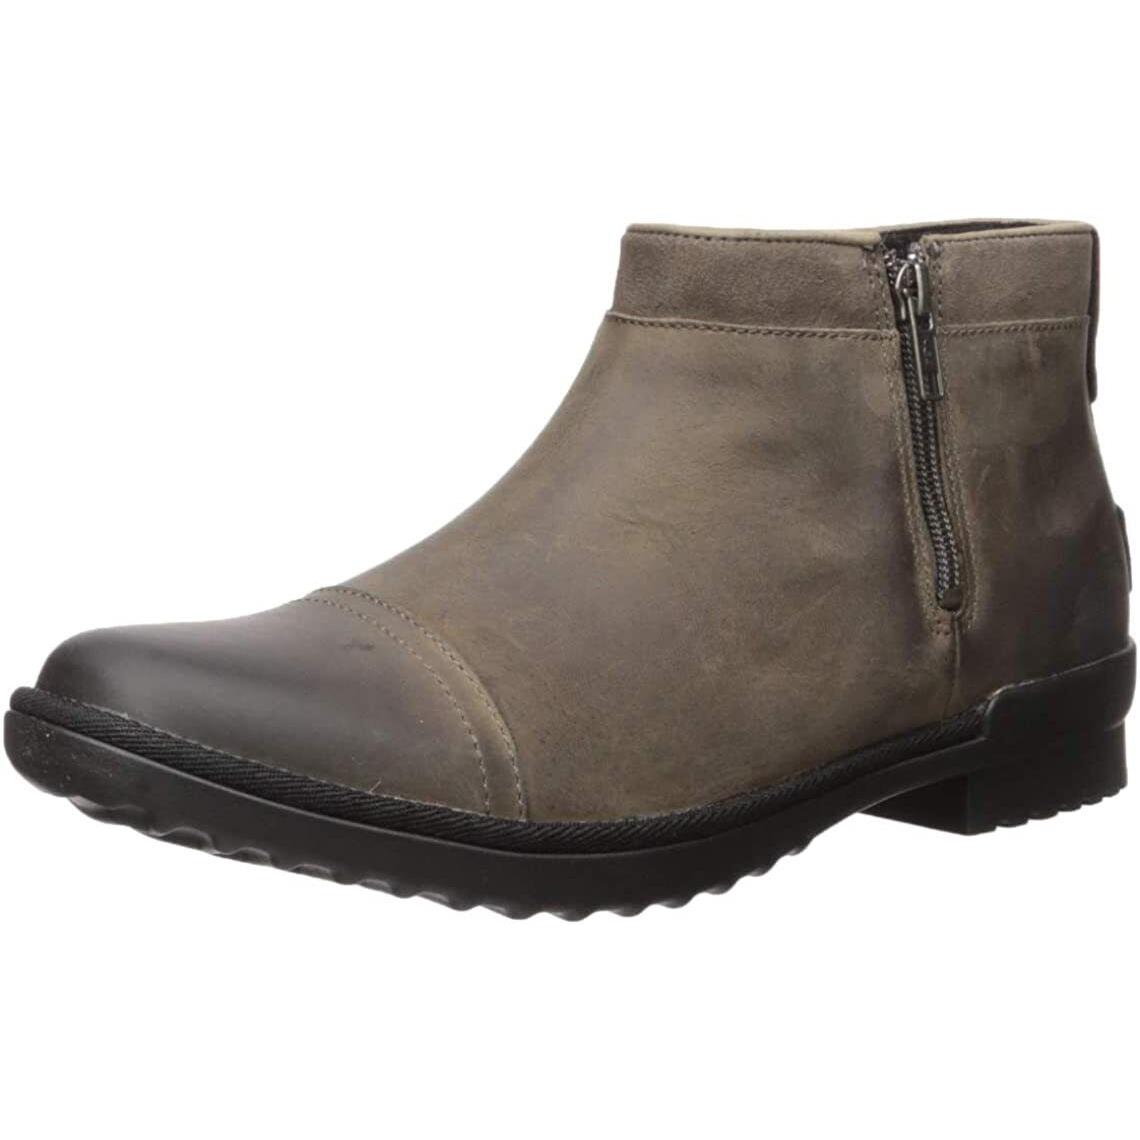 Ugg Waterproof Attell Leather Ankle Boots 5.5 Women or Big Kids 3.5 + Shoe Bag - Mole